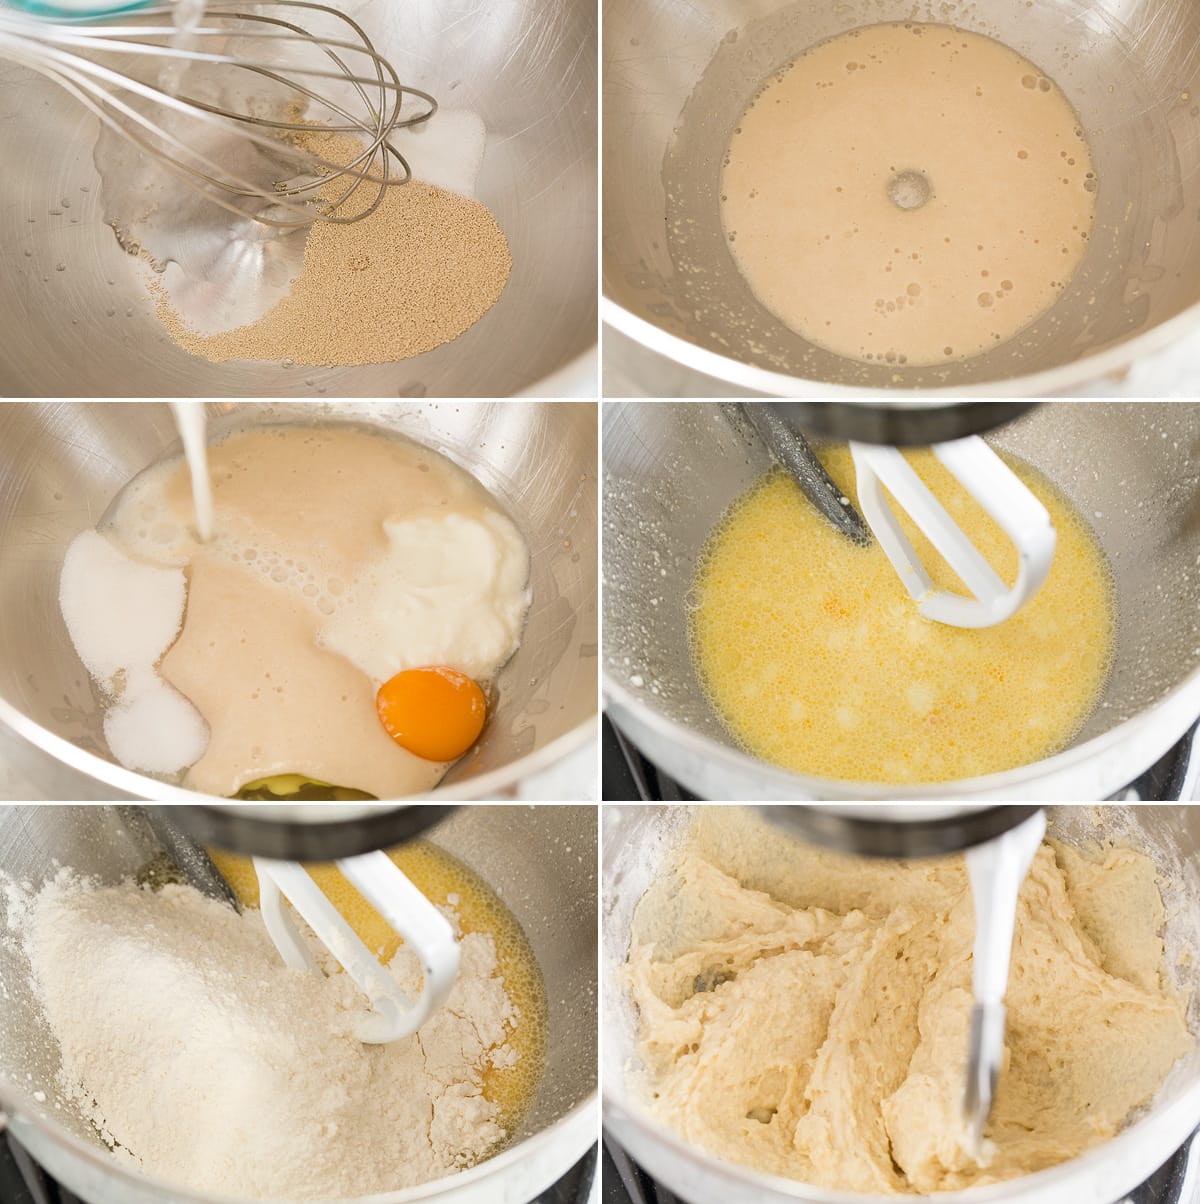 Steps 1 - 6 of making naan dough in mixer bowl.